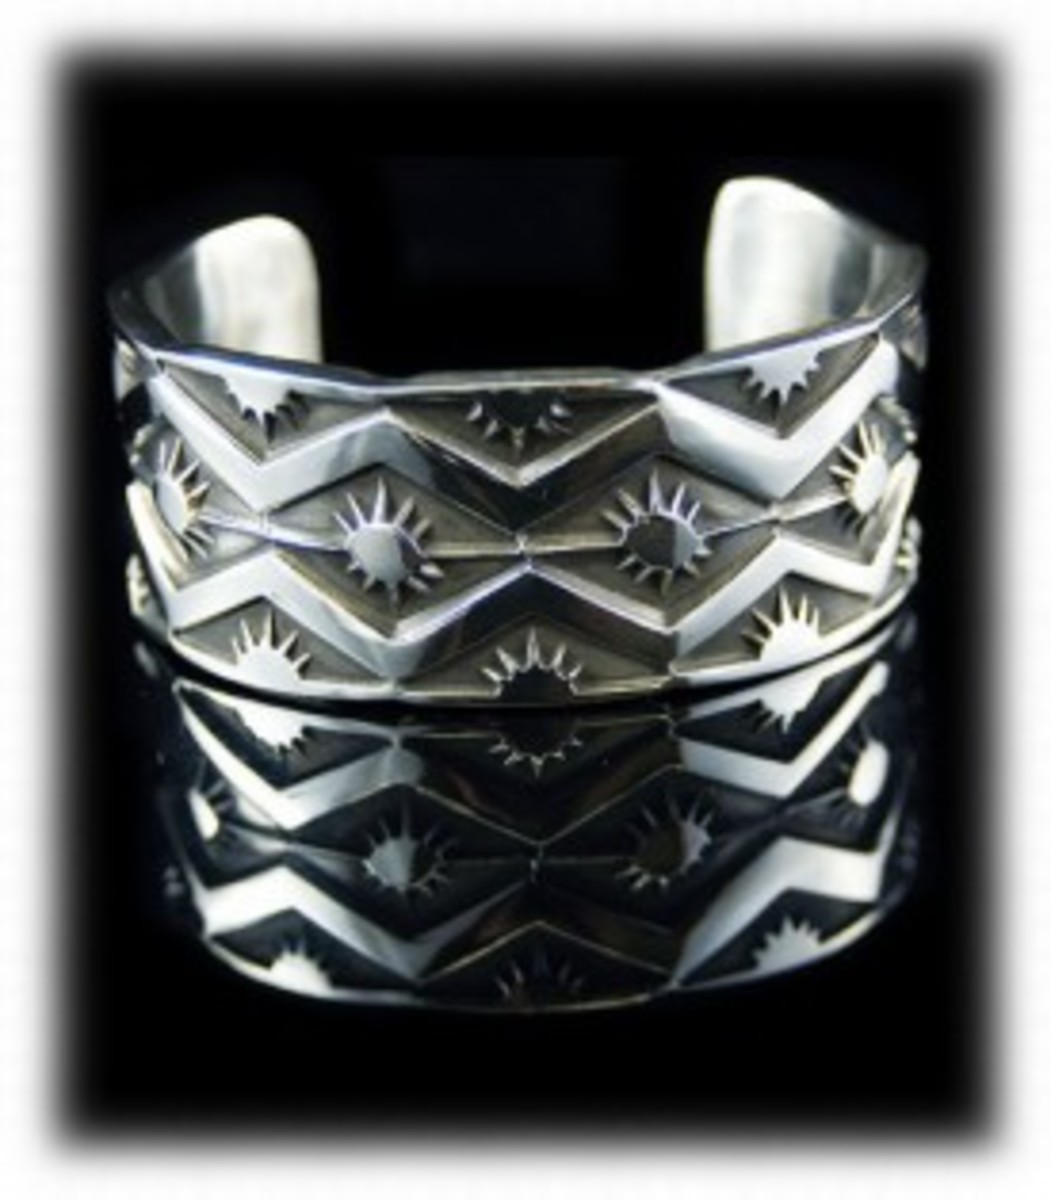 Navajo silver cuff bracelet with Navajo stamping and carving before the use of turquoise.